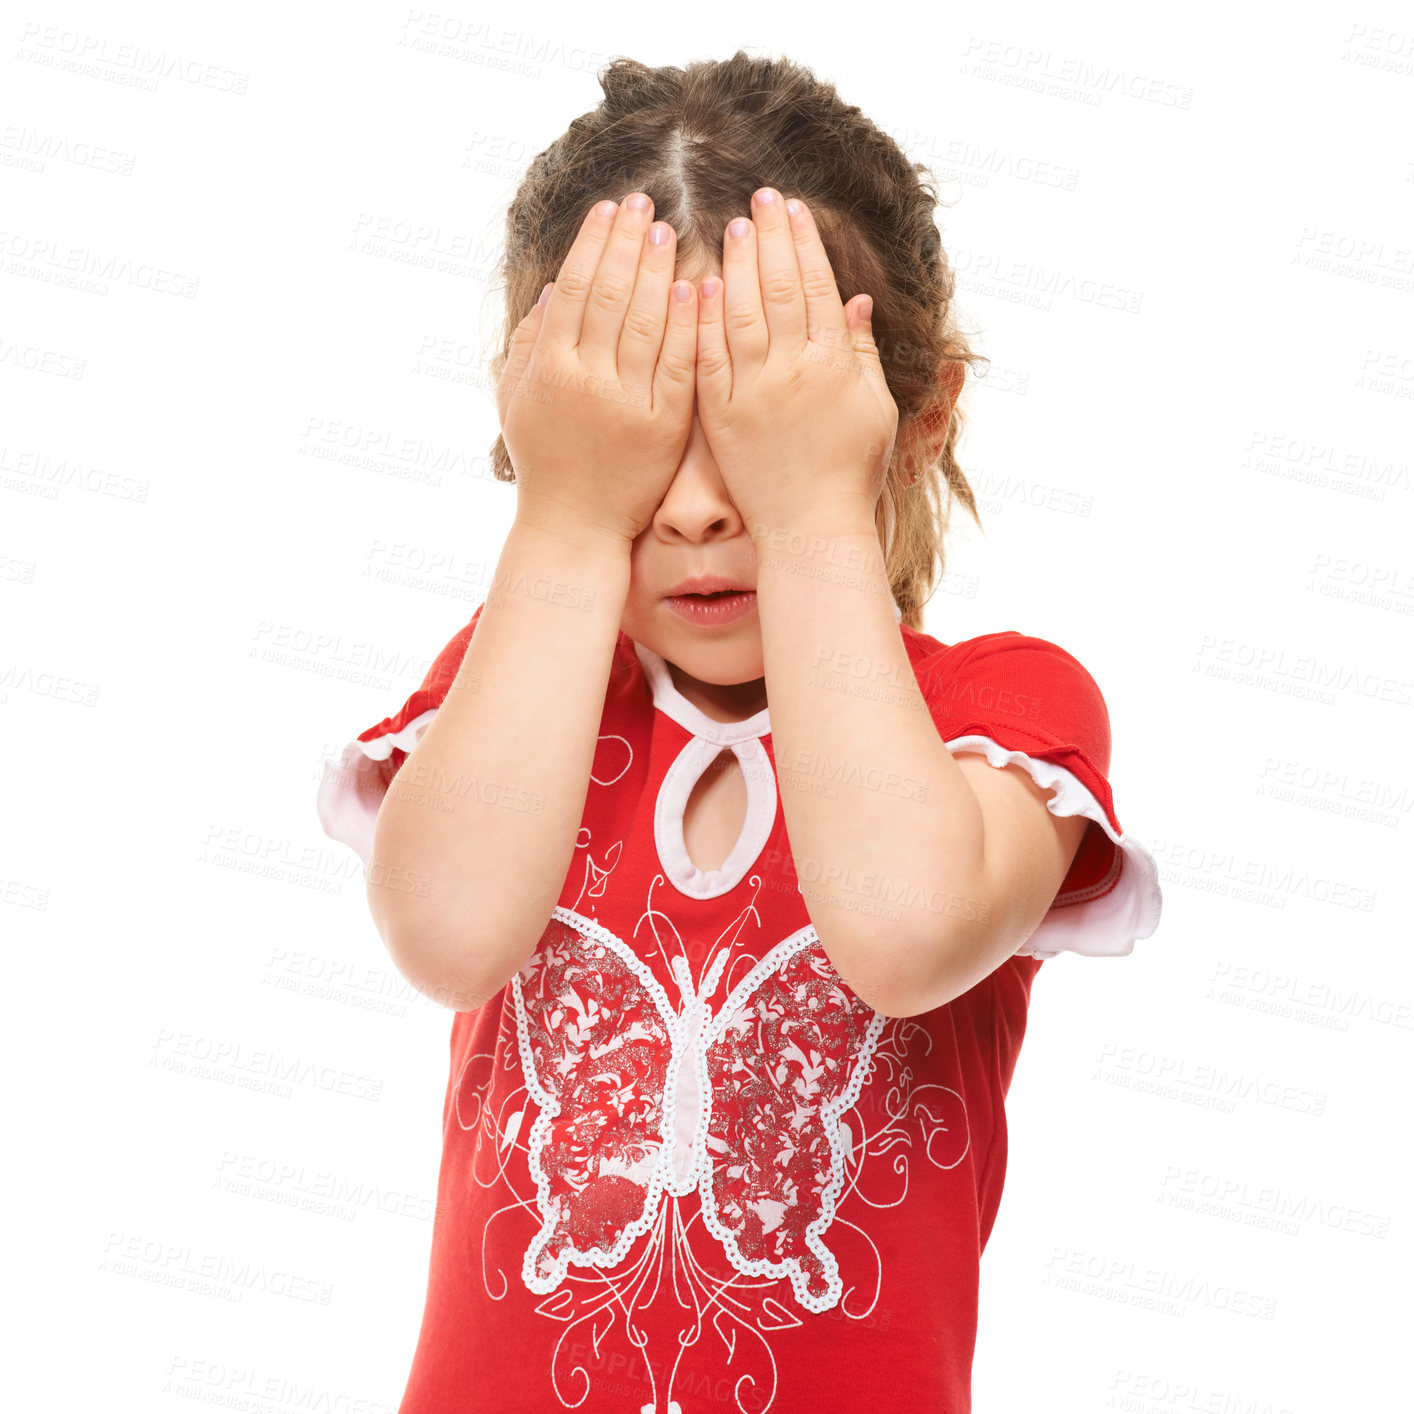 Buy stock photo Cute little girl covering her eyes against a white background